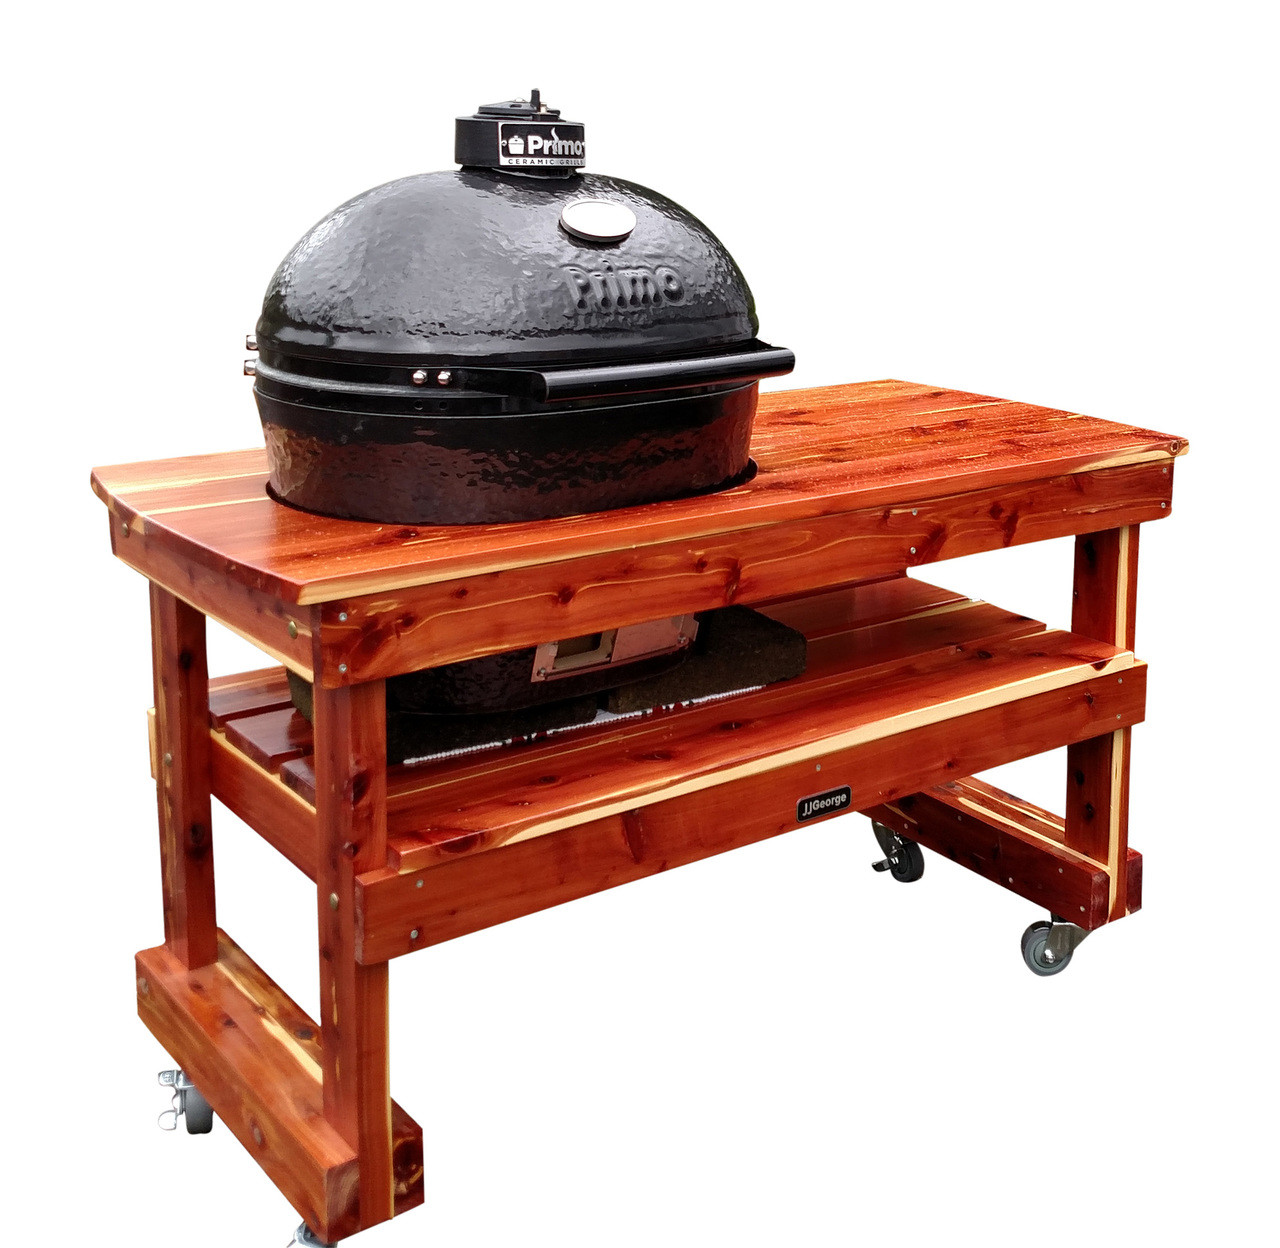 14 Cantonese Wok for Medium Big Green EGG & Large Primo Oval Grills —  Ceramic Grill Store